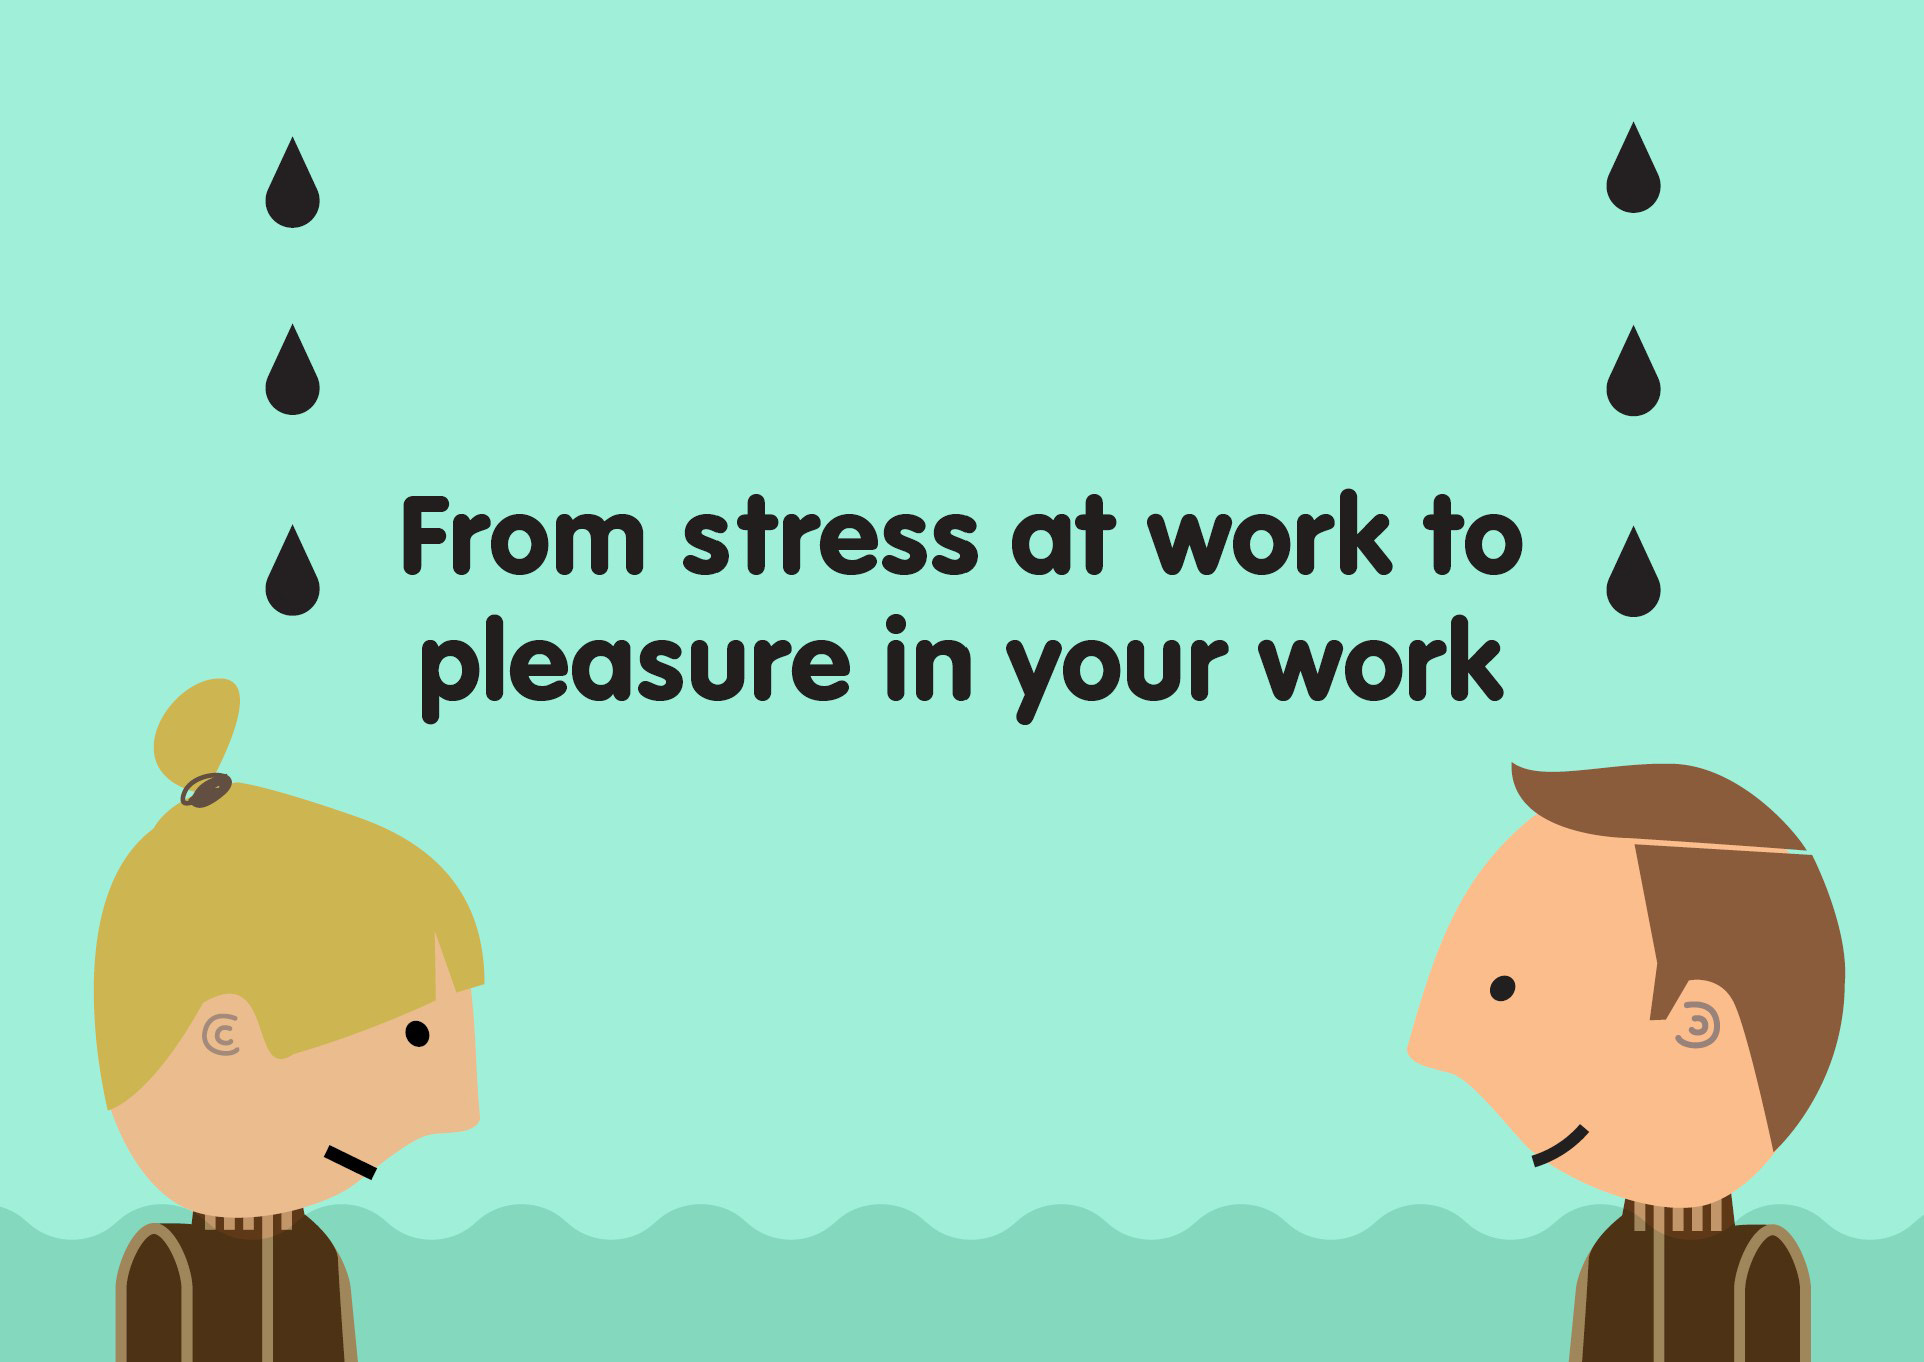 From stress at work to pleasure in your work